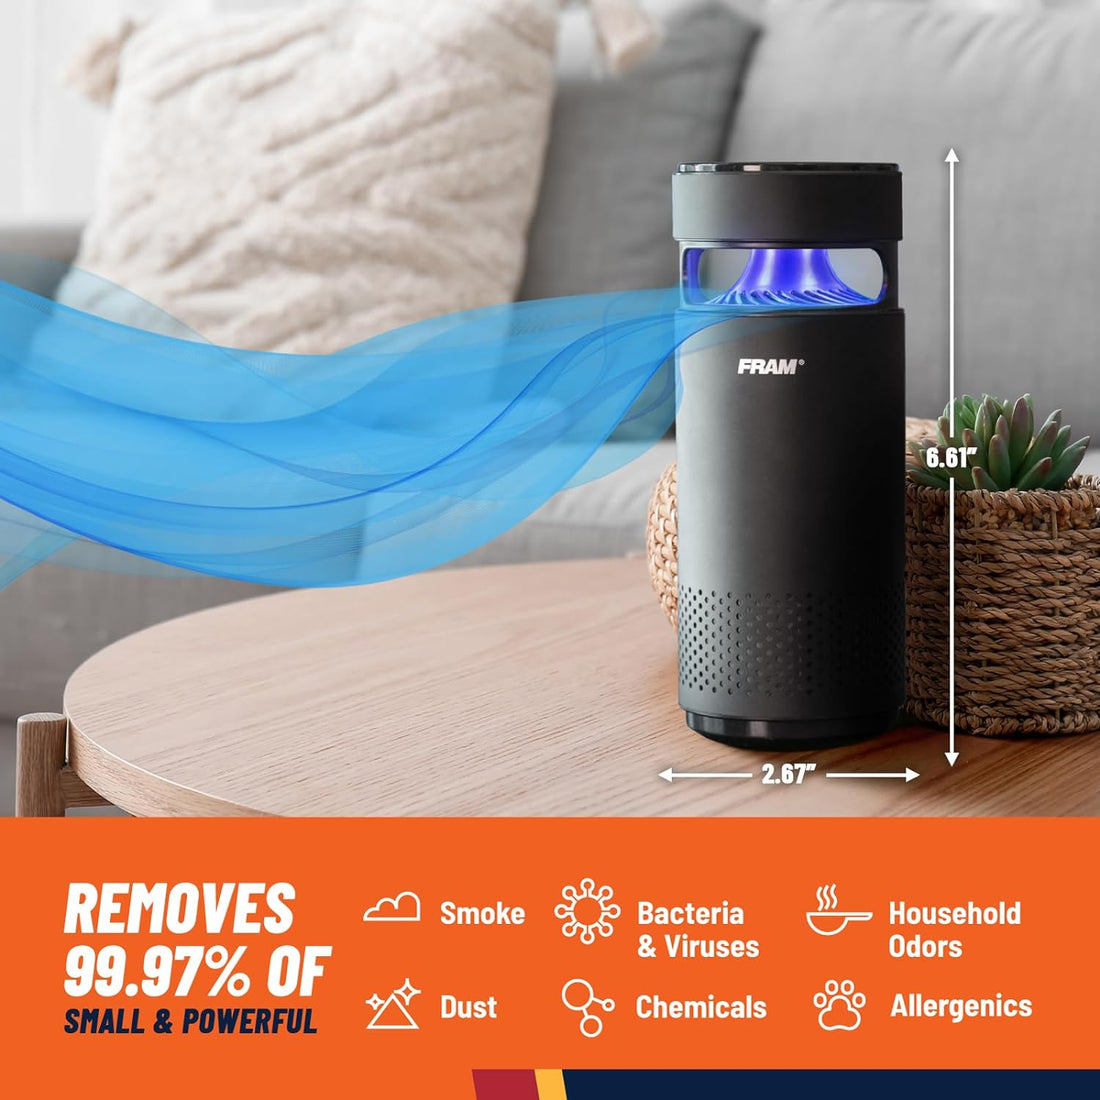 FRAM Portable Air Purifier with H13 HEPA Filtration and UV-C LED Sterilization | Cordless Design for Home, Vehicles, Work, and Travel | Cleans Air of Dust, Smoke, and Other Contaminants | CAP30100